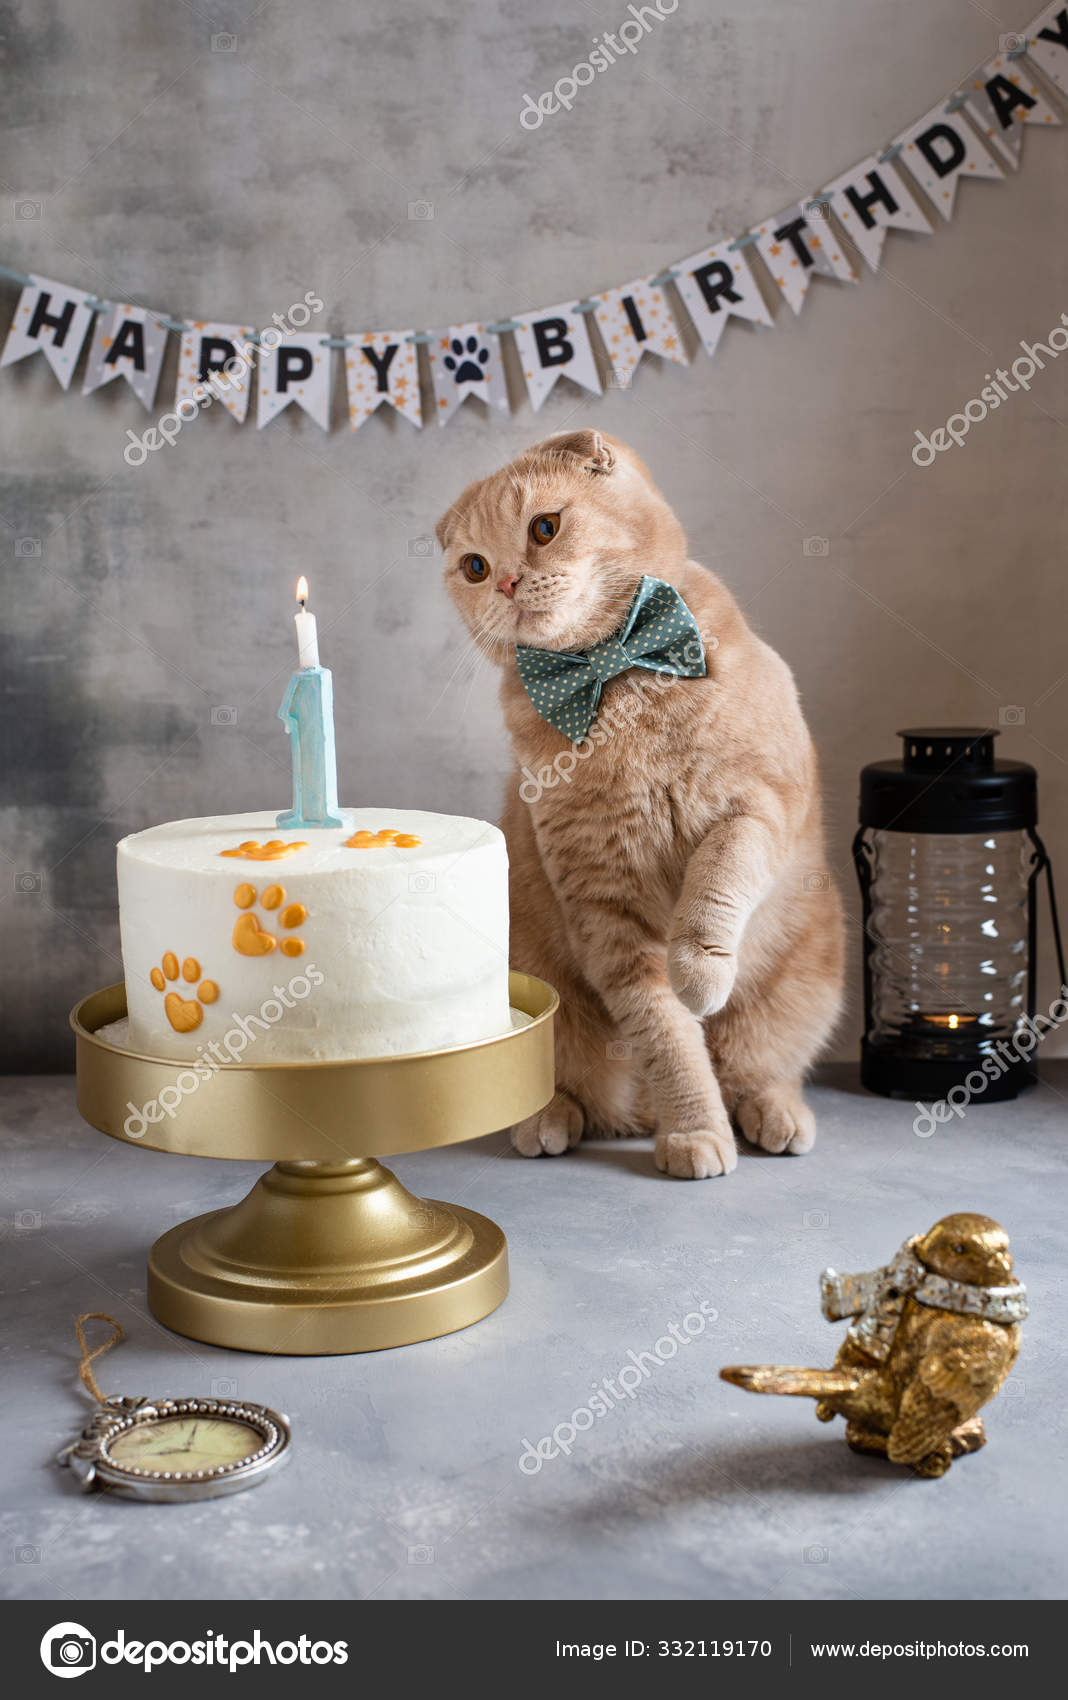 Making a wish. Funny cat with bow tie and birthday cake with ...